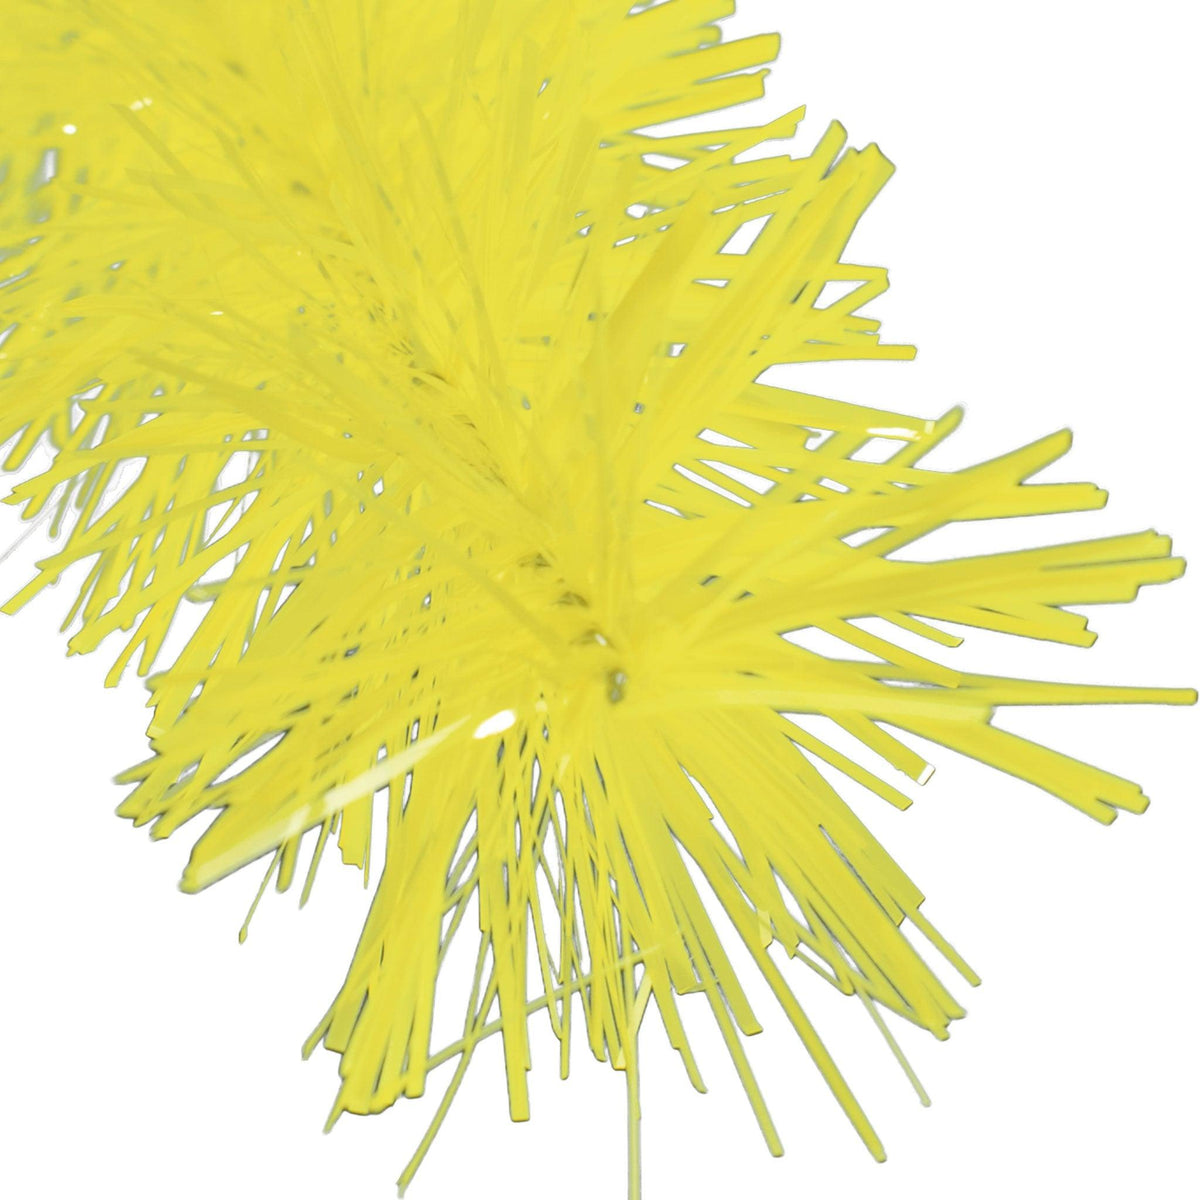 Lee Display's brand new 25ft Shiny Yellow Tinsel Garlands and Fringe Embellishments on sale at leedisplay.com